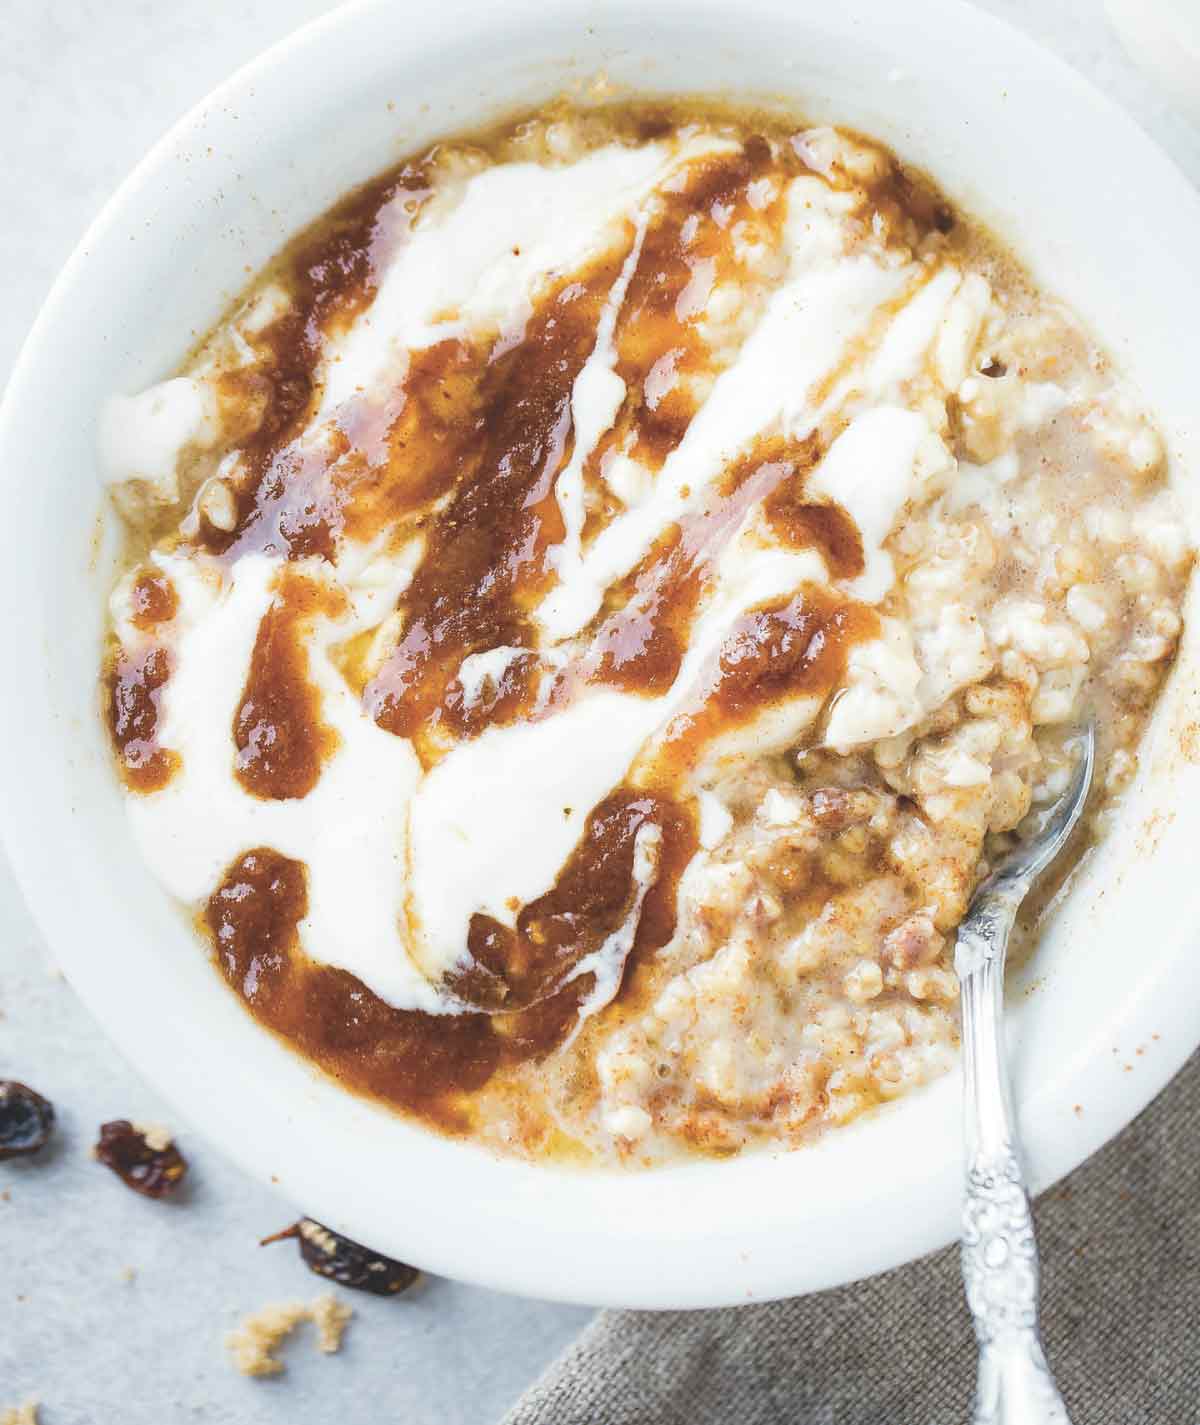 A bowl of cinnamon roll oatmeal with brown sugar swirl and yogurt drizzled over the top.